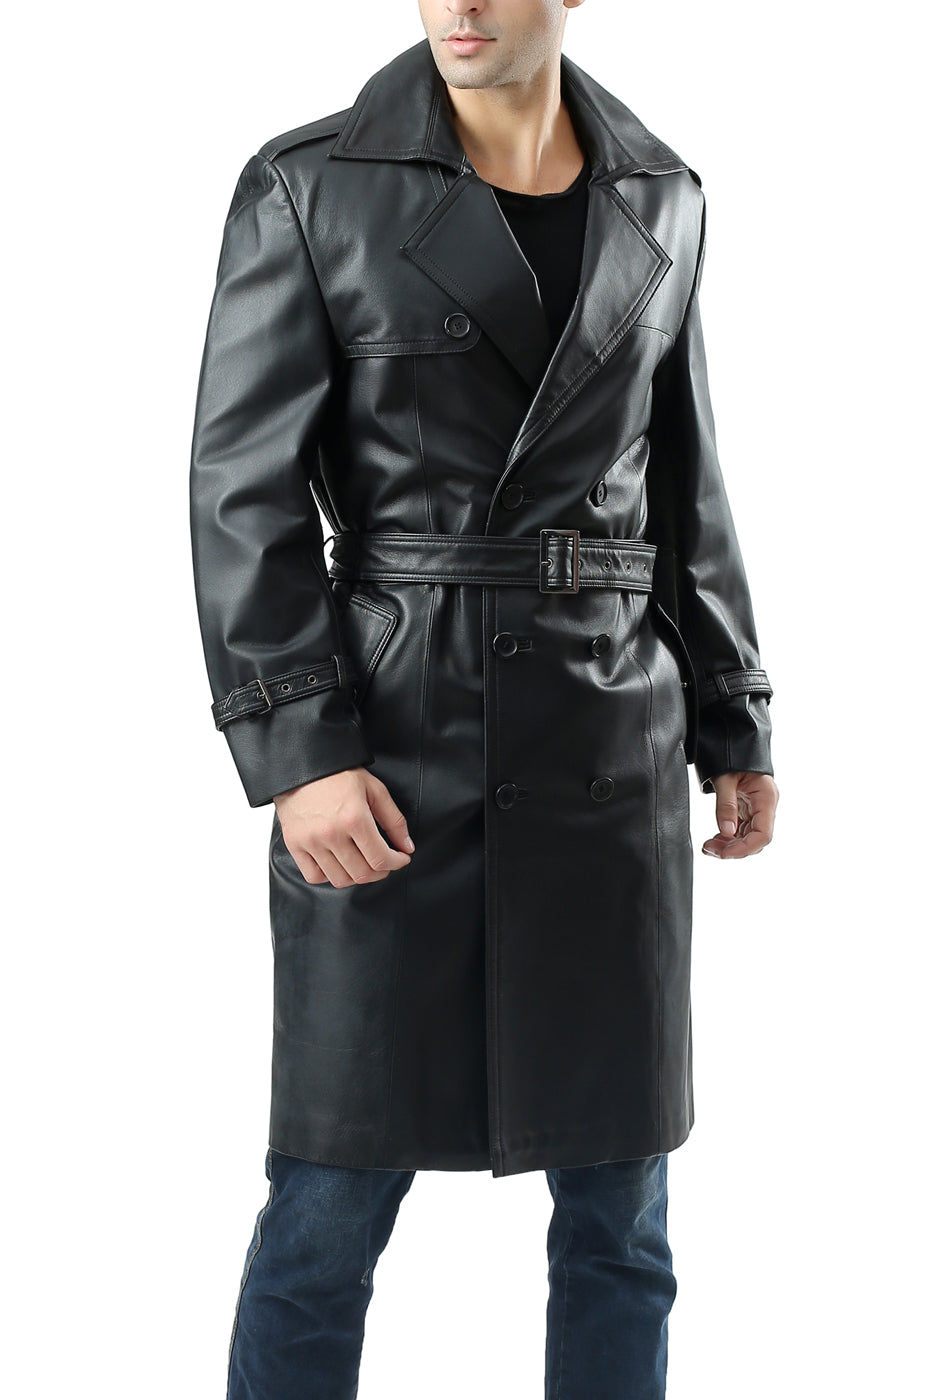 BGSD Monogram Collection Men Classic Leather Long Trench Coat